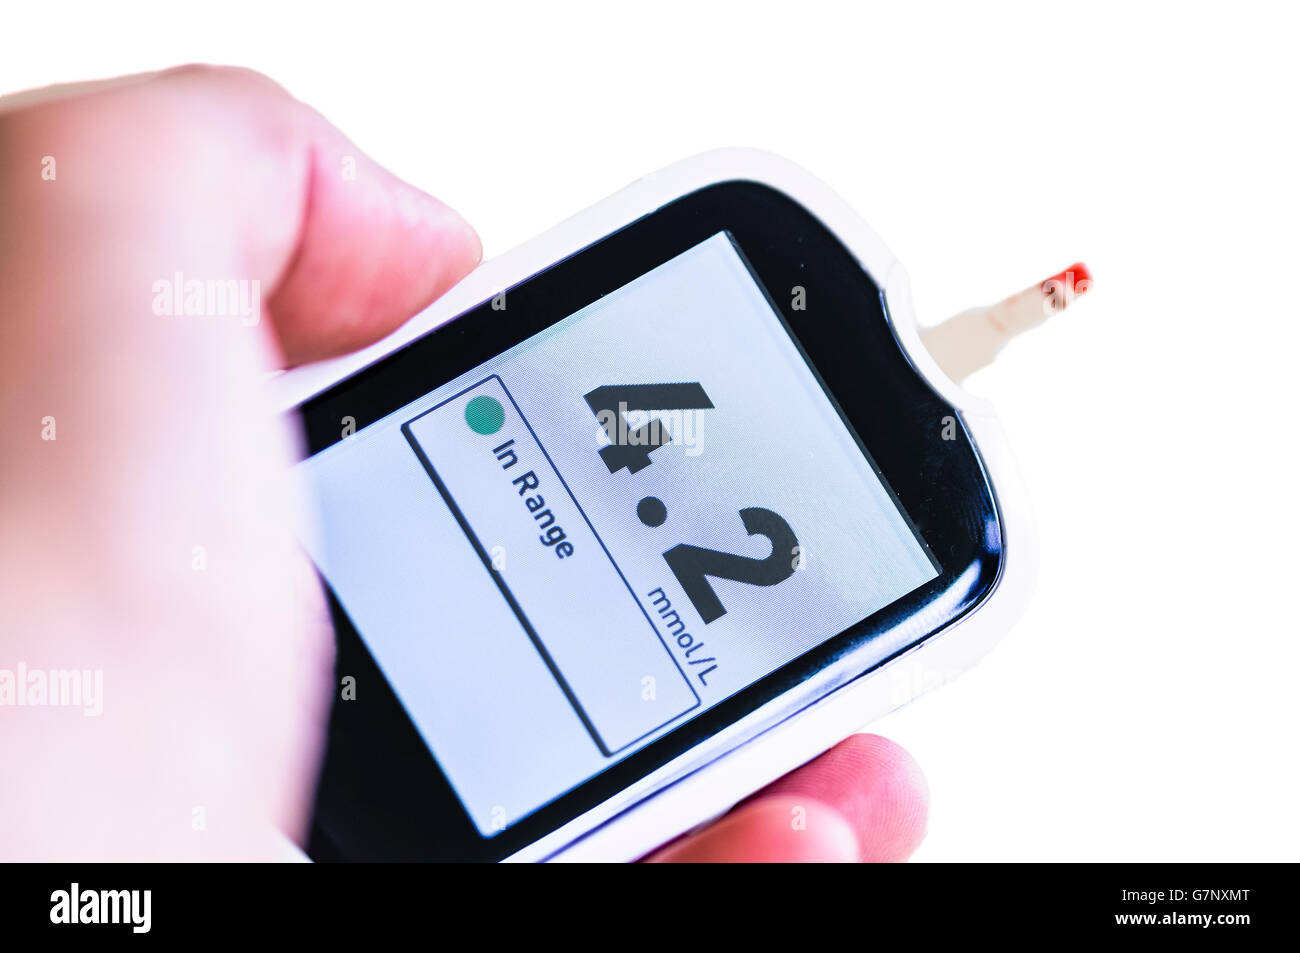 Blood glucose monitor showing a glucose level of 4.2mmol/L, within the normal range of 4.0 to 5.9 mmol/L under normal conditions Stock Photo